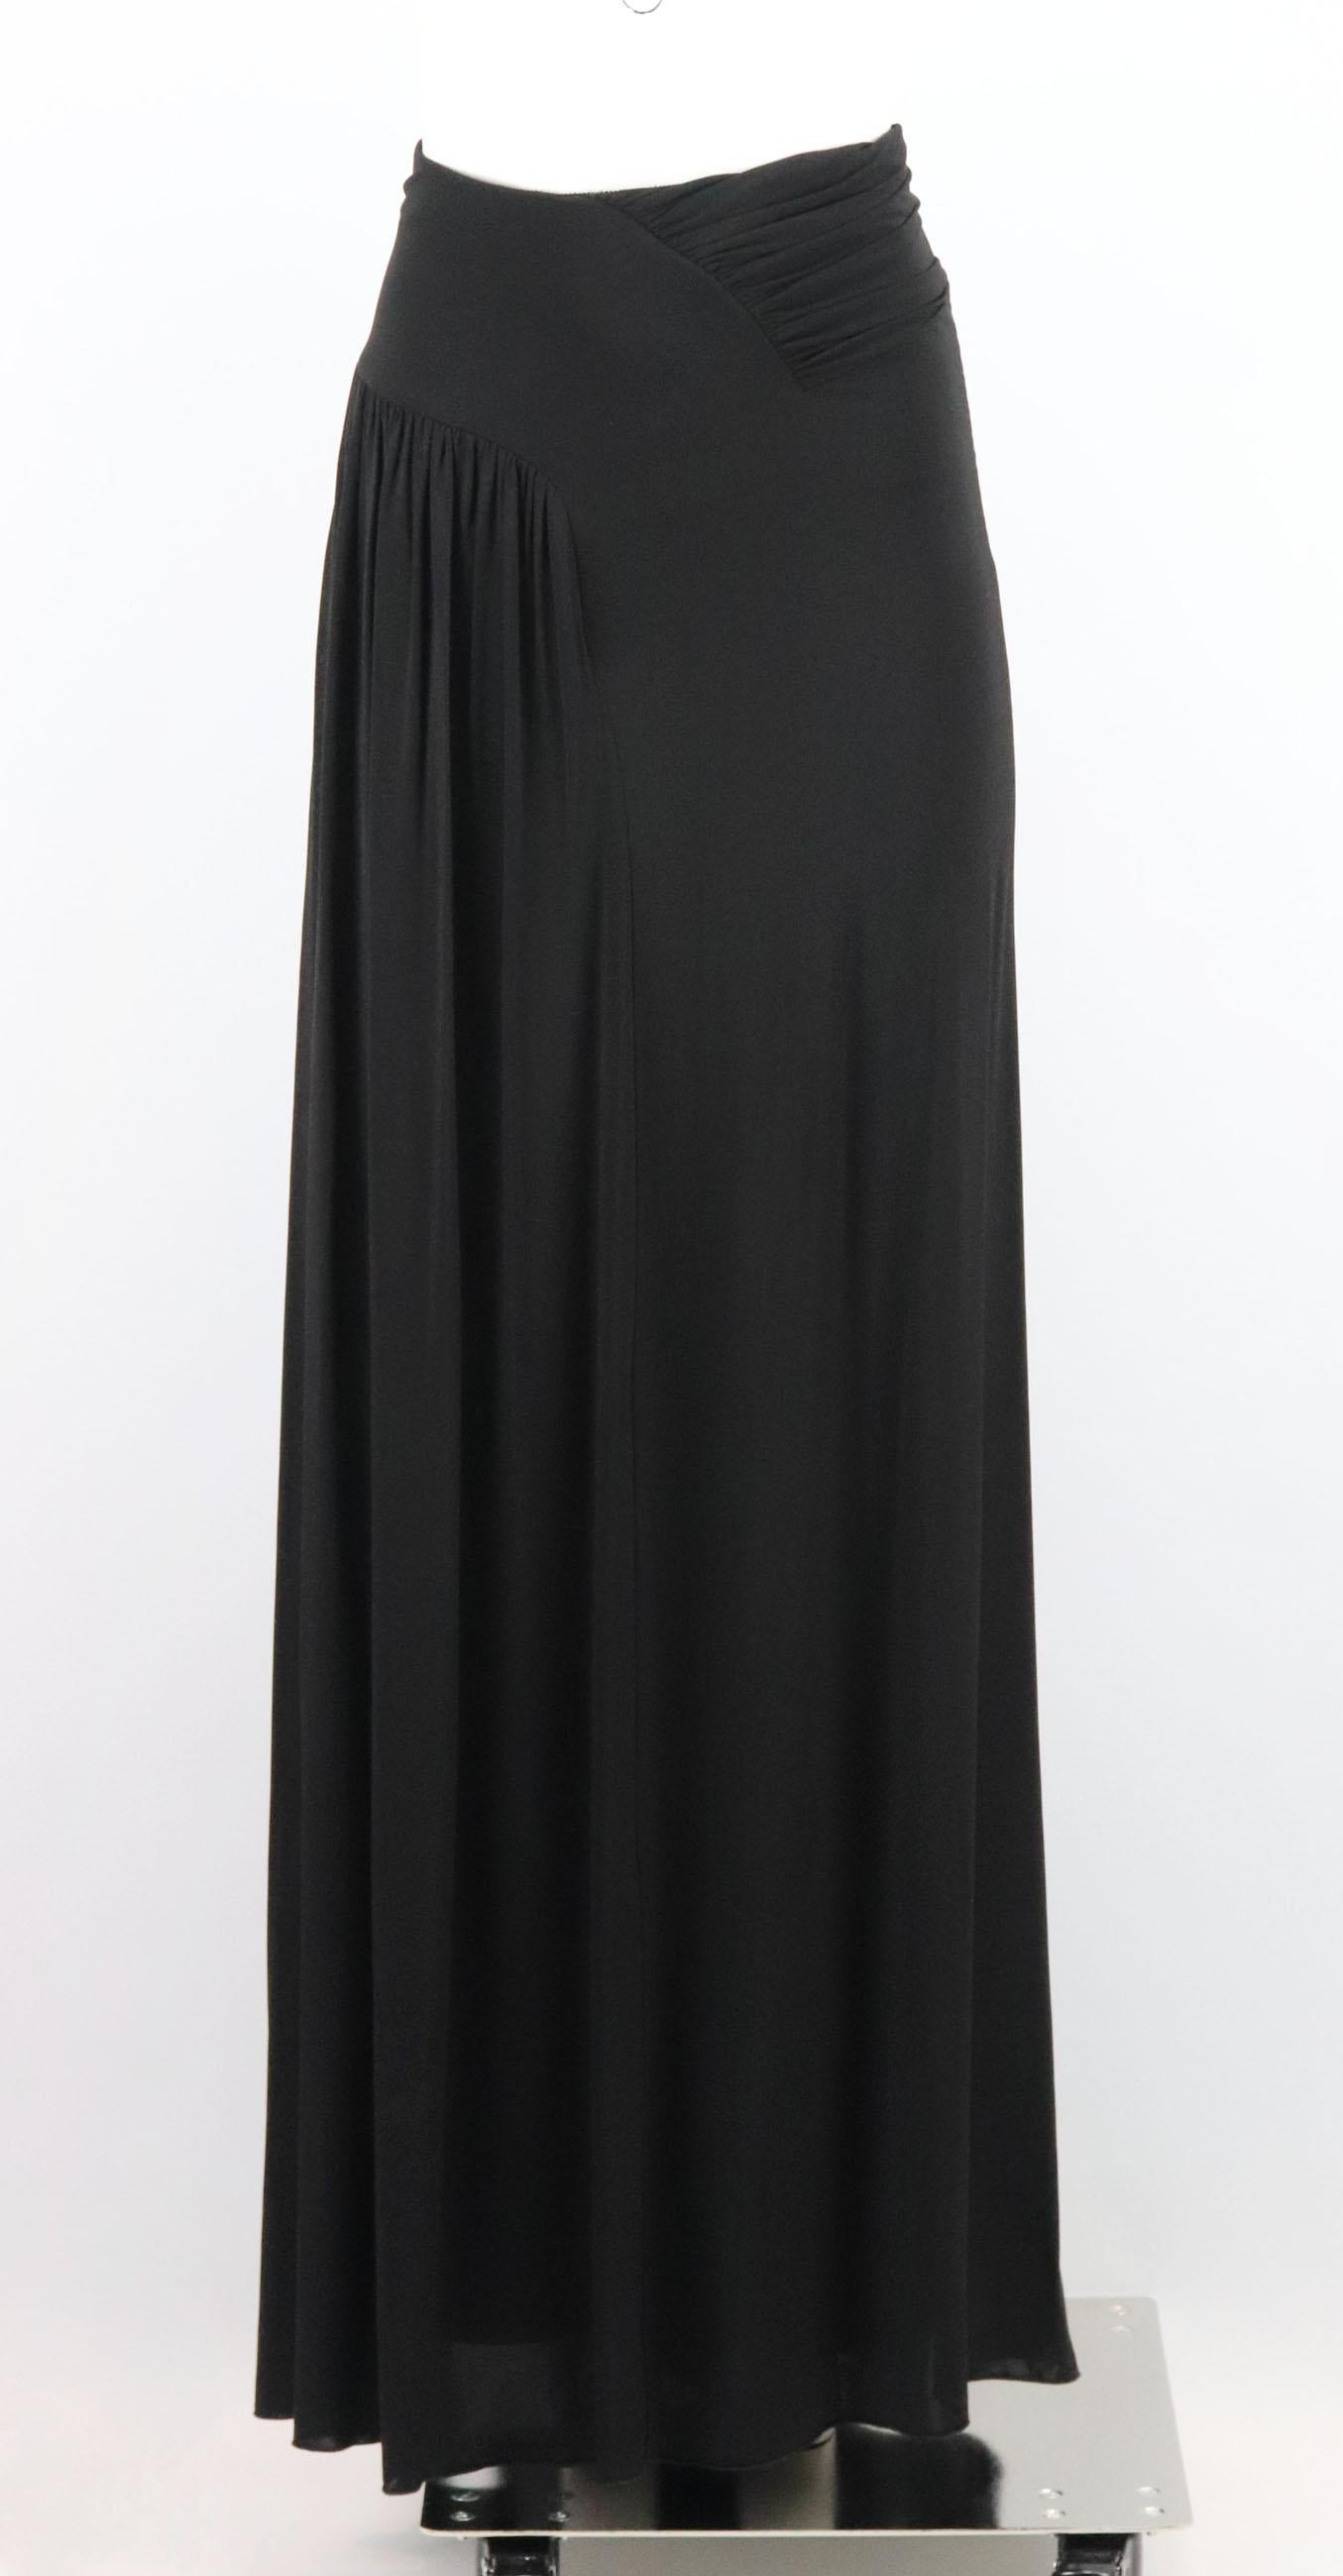 This maxi skirt by Alberta Ferretti is perfect for slipping on while dining al fresco, it's been made in Italy from stretch-jersey that's ruched to enhance your curves.
Black stretch-jersey.
Concealed zip fastening at back.
95% Rayon, 5% other